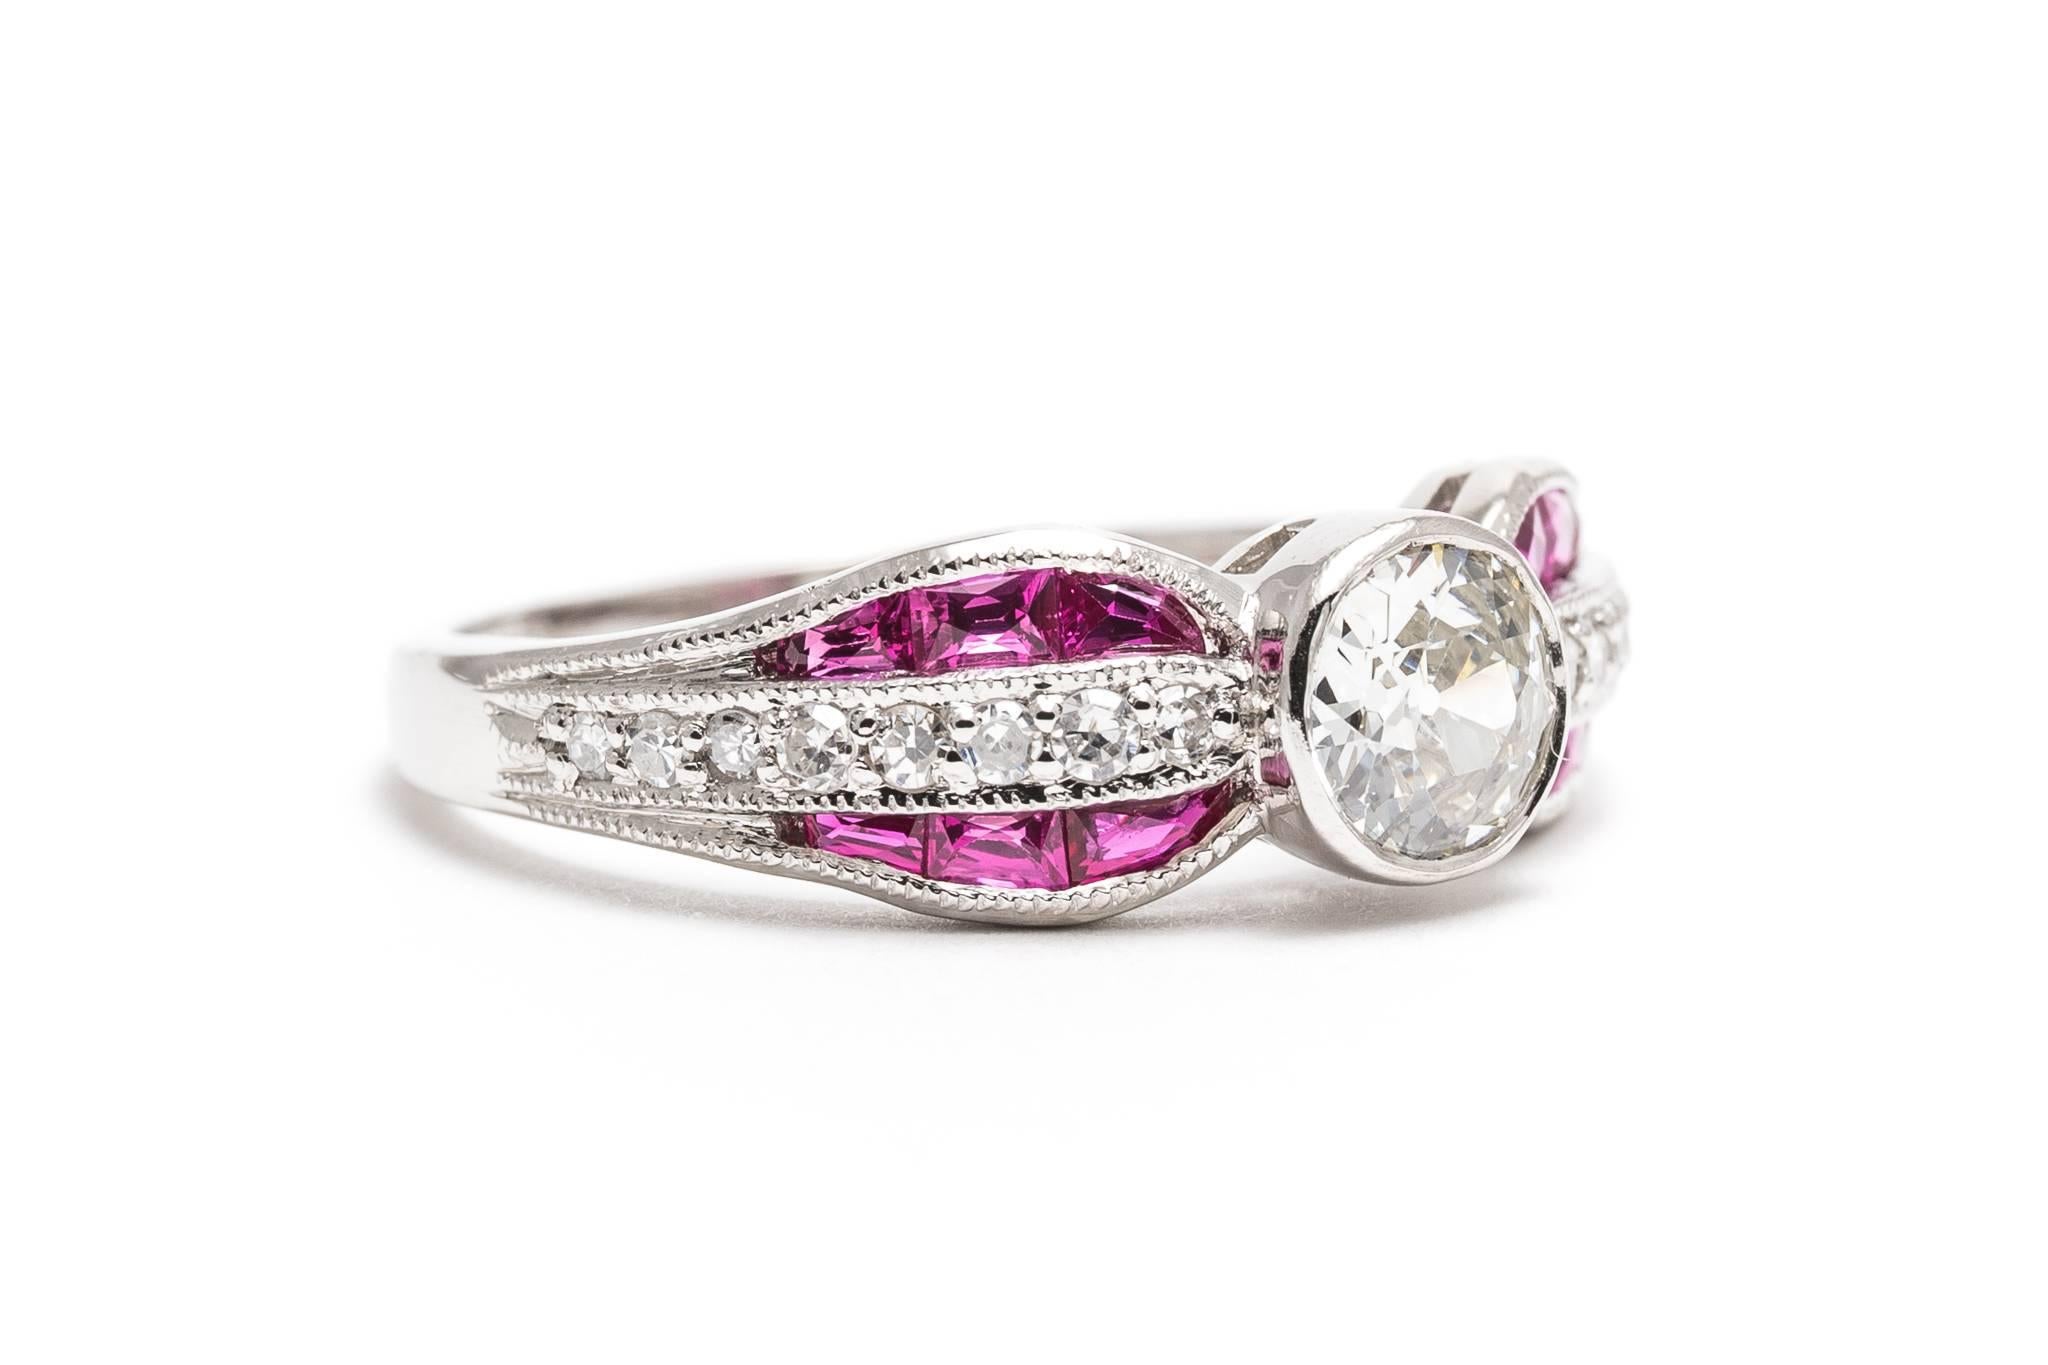 Beacon Hill Jewelers Presents:  

A beautiful bow shaped diamond and ruby ring in luxurious 900 fine platinum. Masterfully hand crafted, this stunning ring features a center bezel set diamond accented by custom cut French cut rubies and sparkling